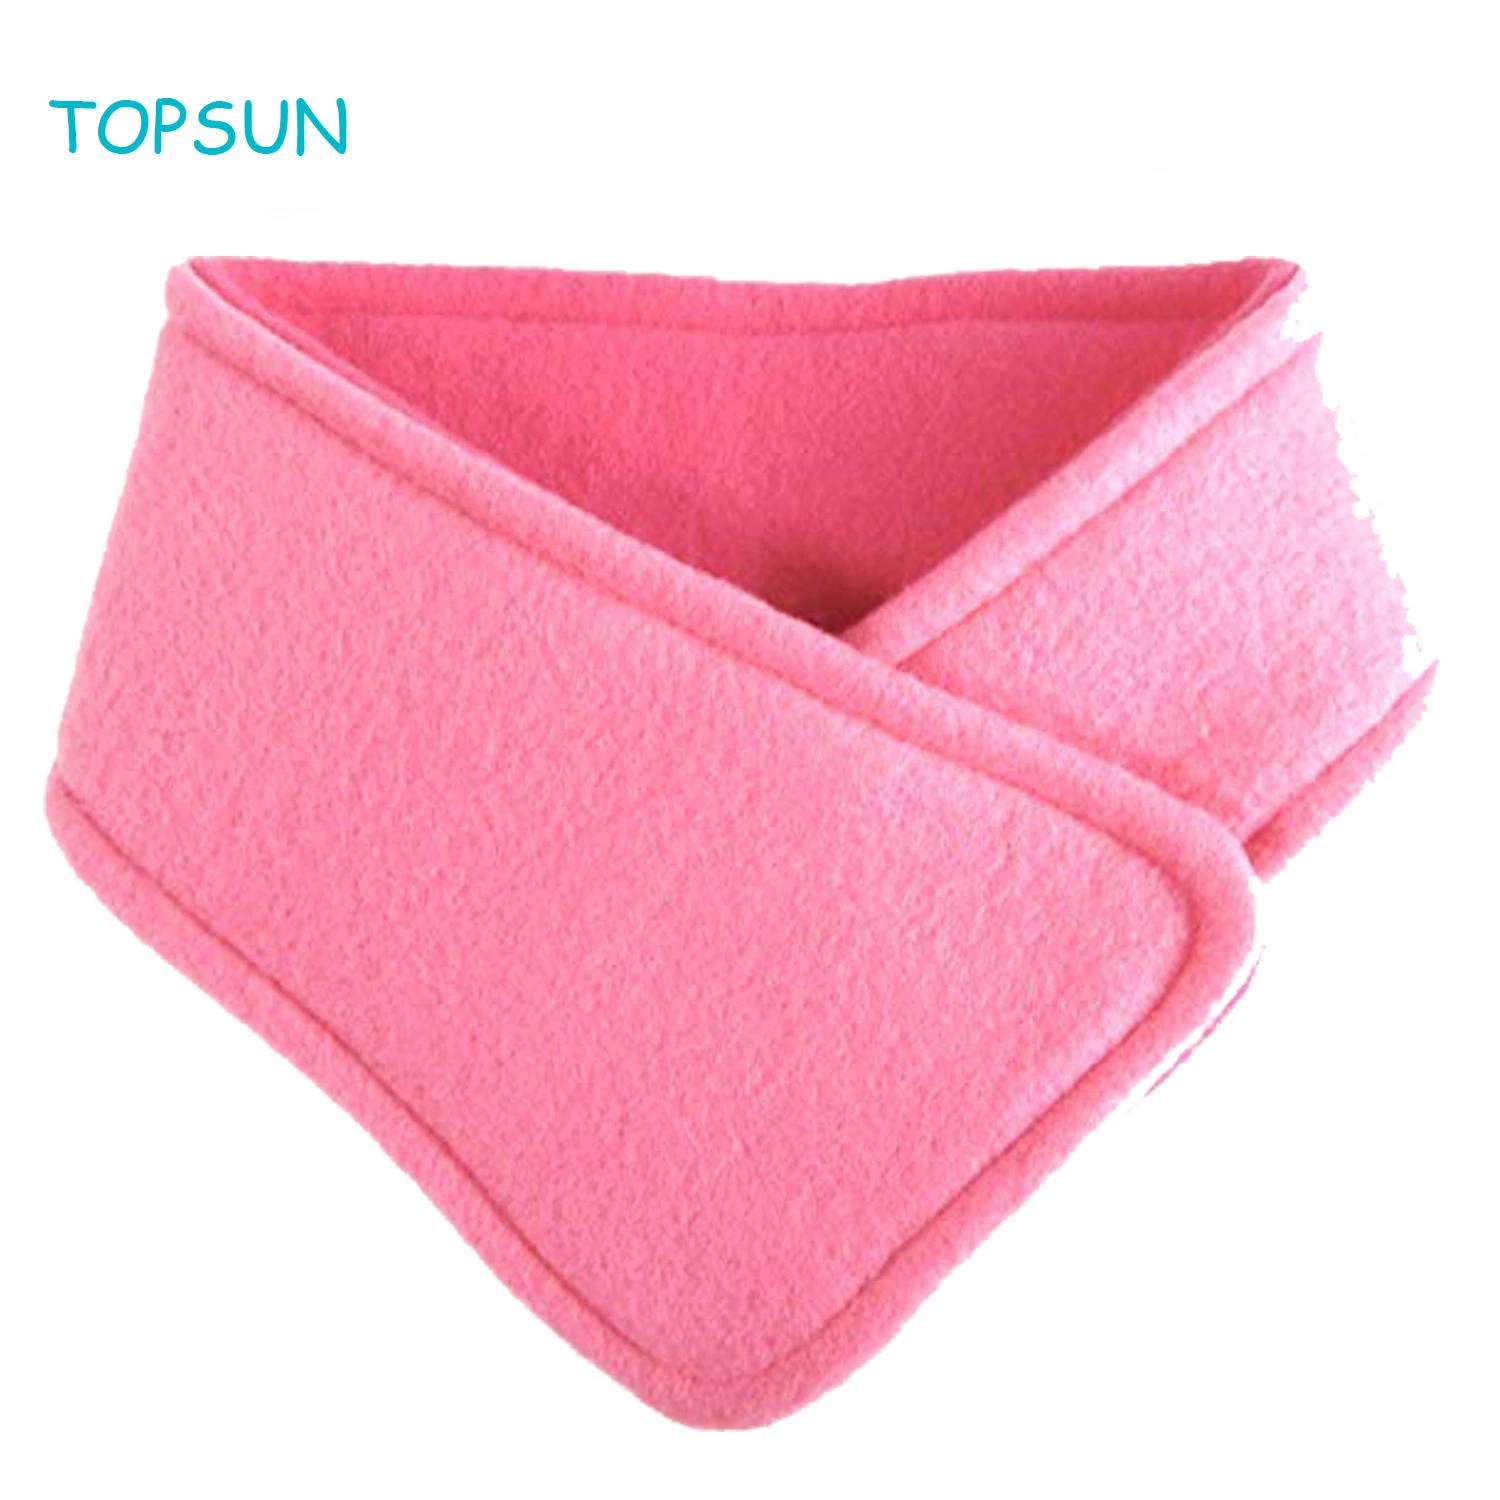 Kids Baby Spring and Autumn Fleece Neck Warmer Winter Scarf Neck Gaiter Cowl Products for Toddlers and Children Made in China